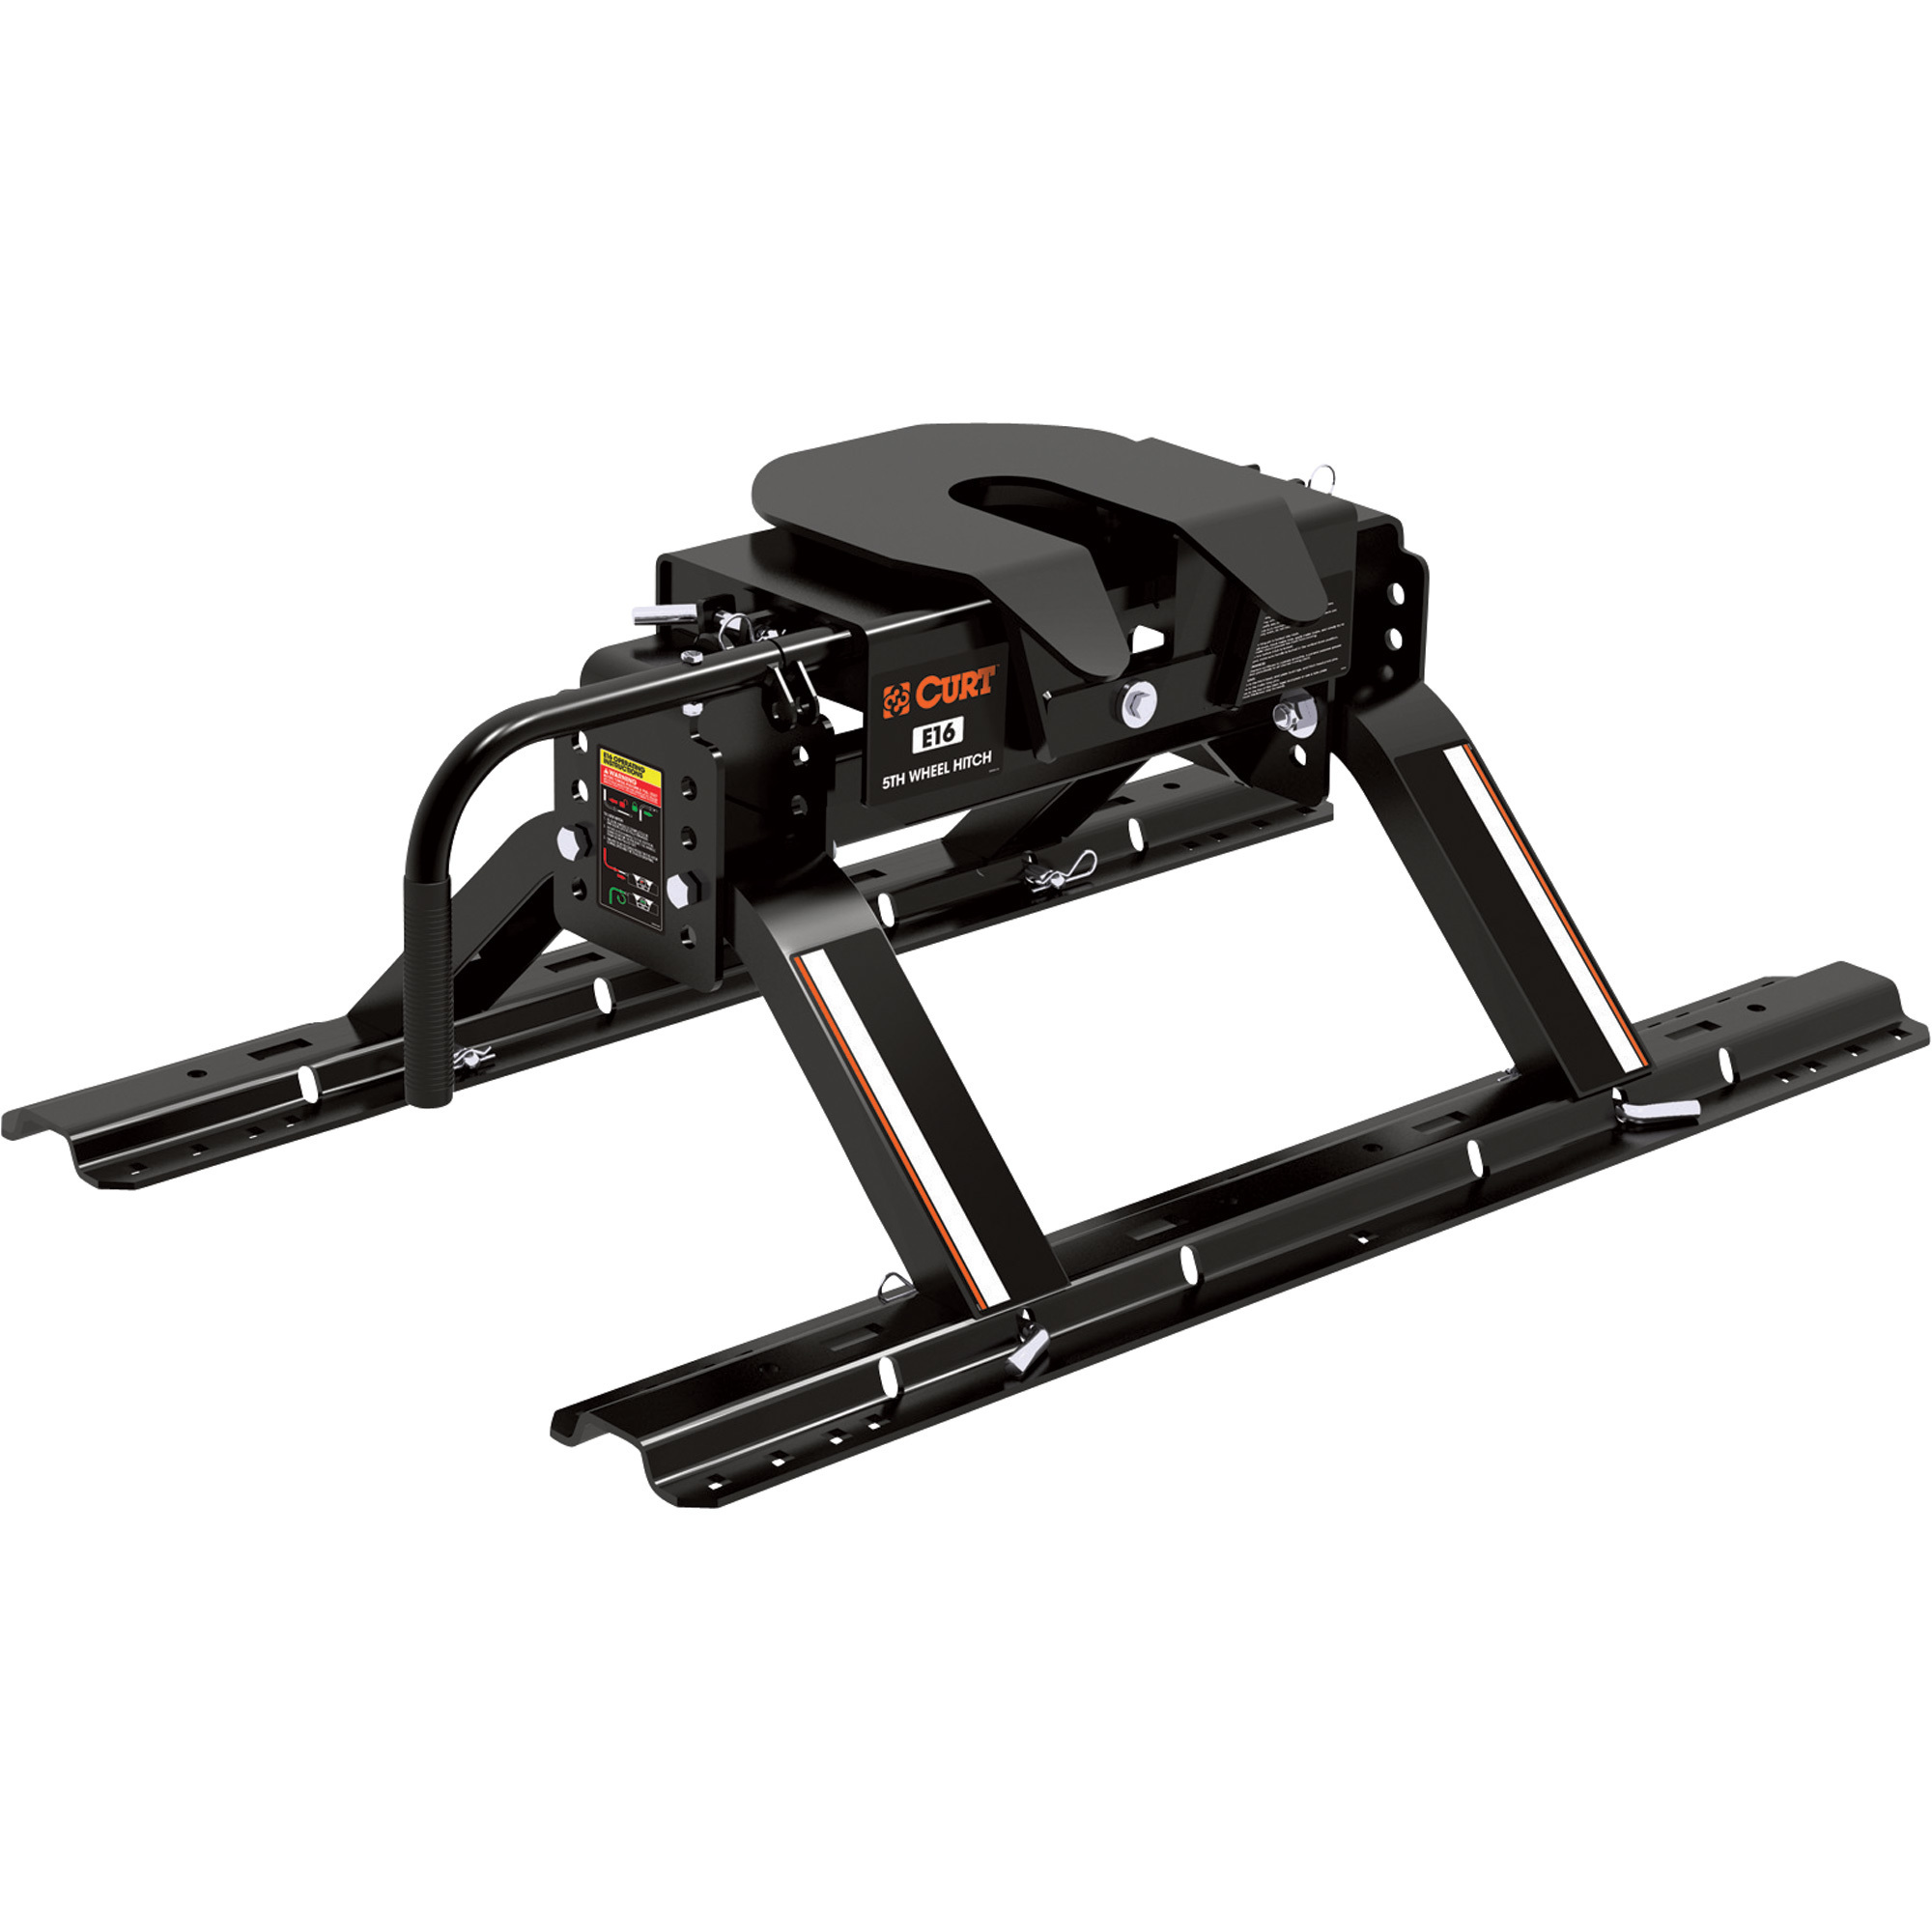 Curt Manufacturing 5th Wheel Hitch with Universal Rail Kit, Model 16116